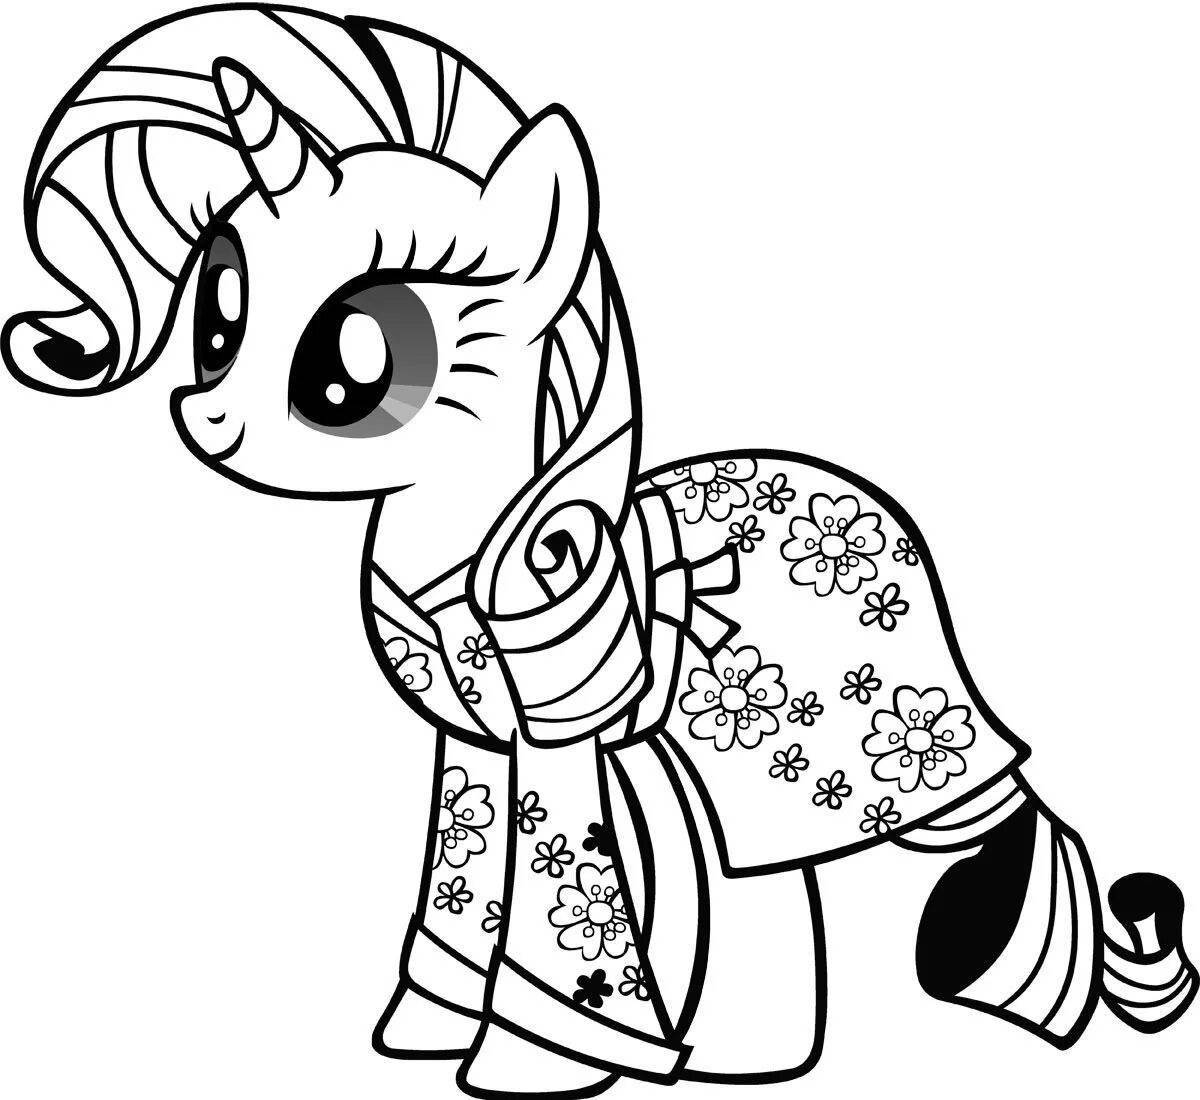 Adorable cute pony coloring book for kids